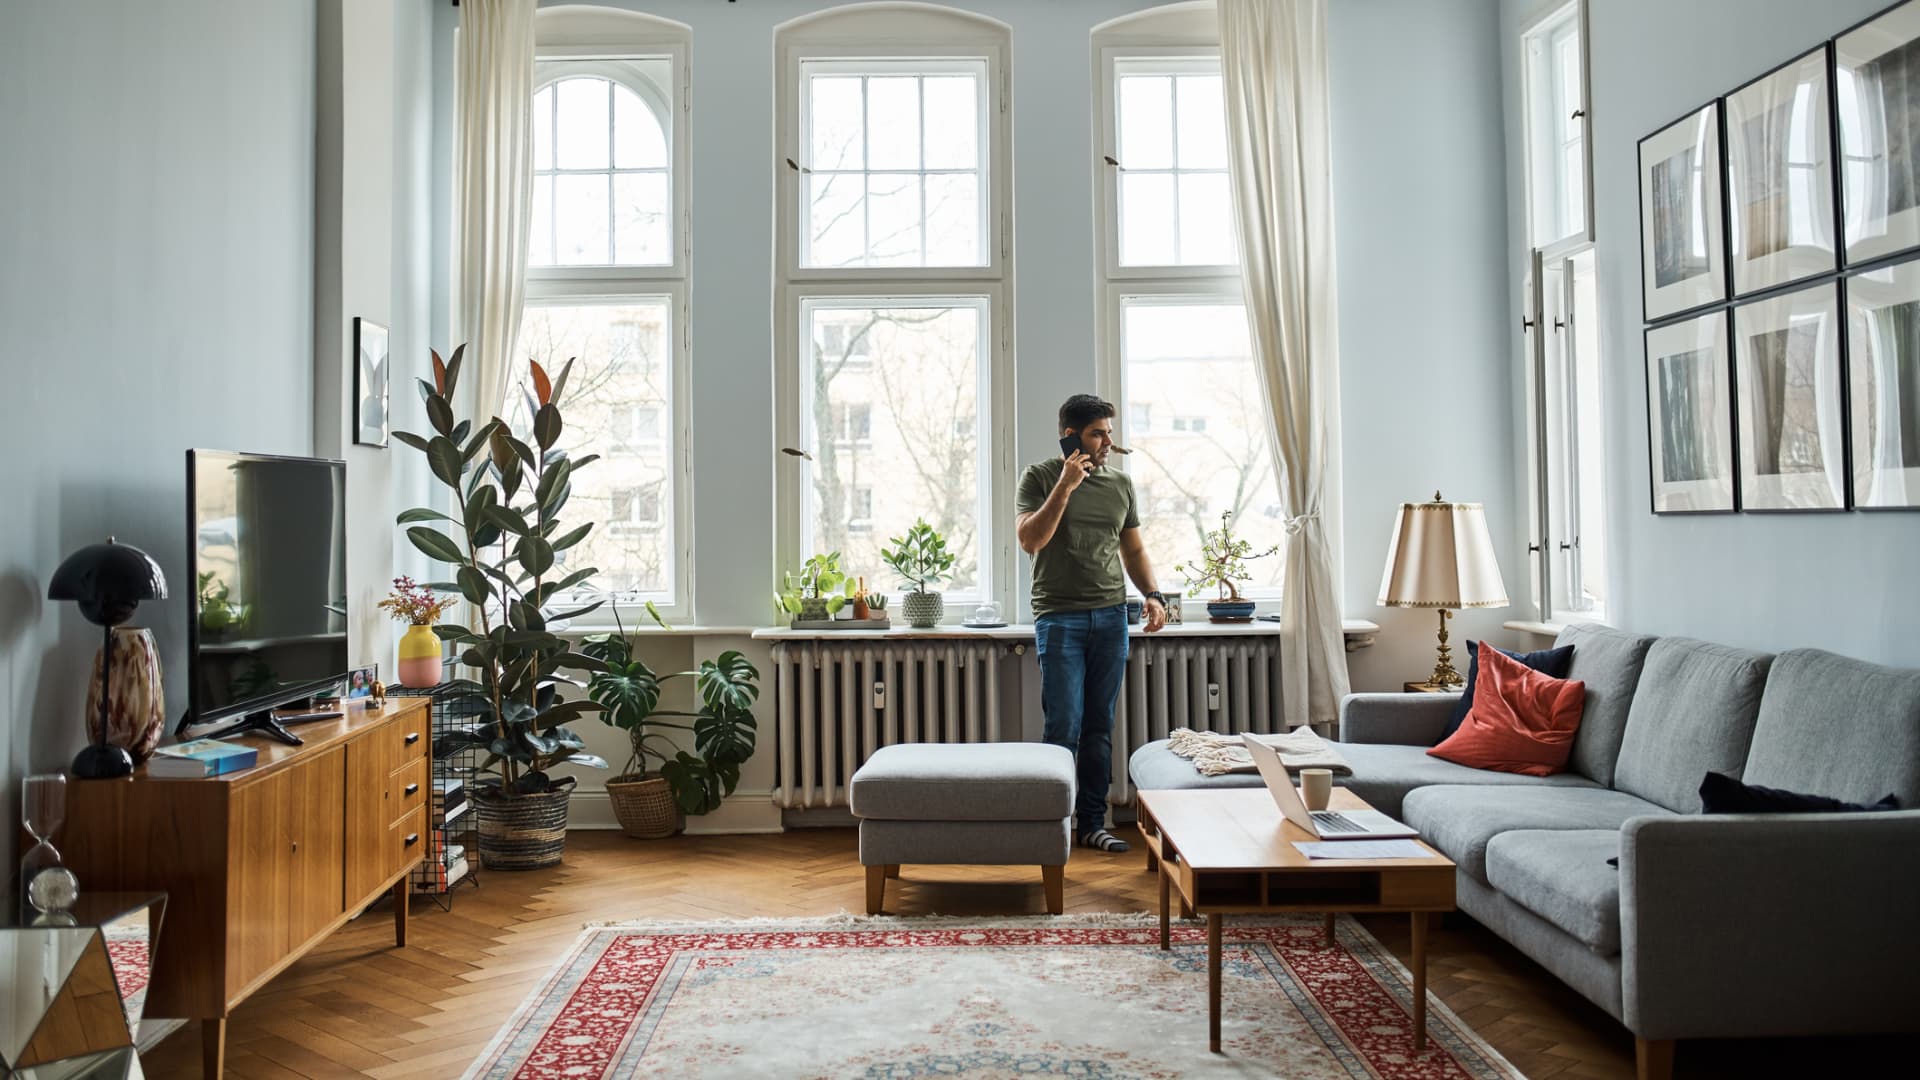 What you should know about renting a condo or cooperative apartment